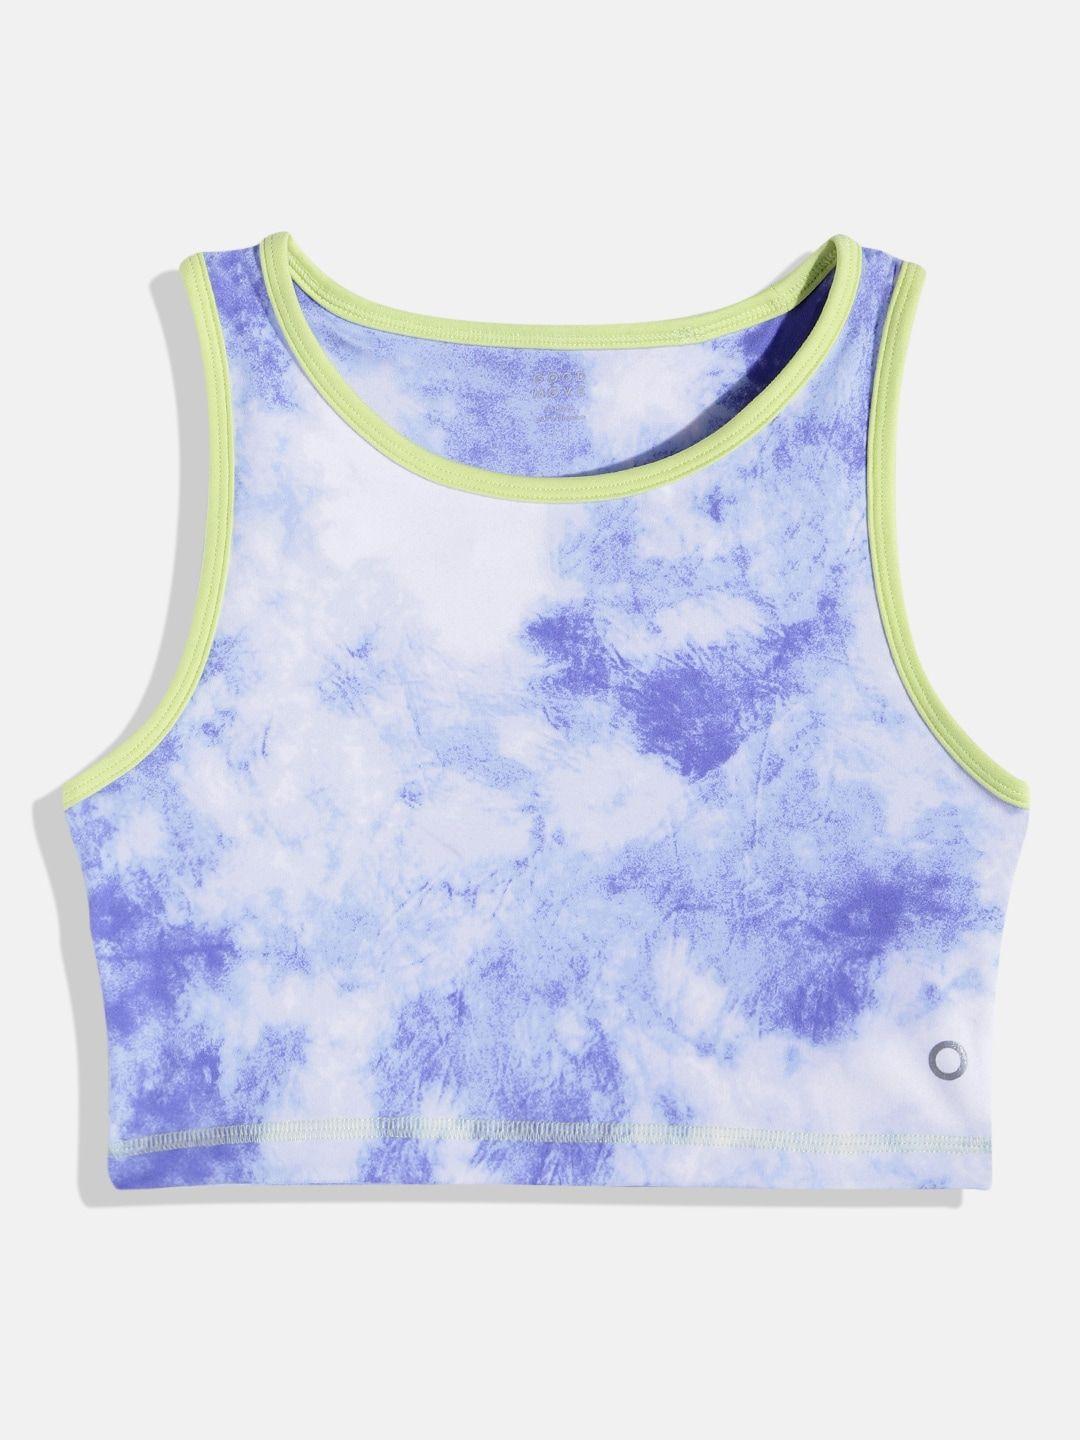 marks-&-spencer-kids-tie-and-dye-printed-sleeveless-t-shirt